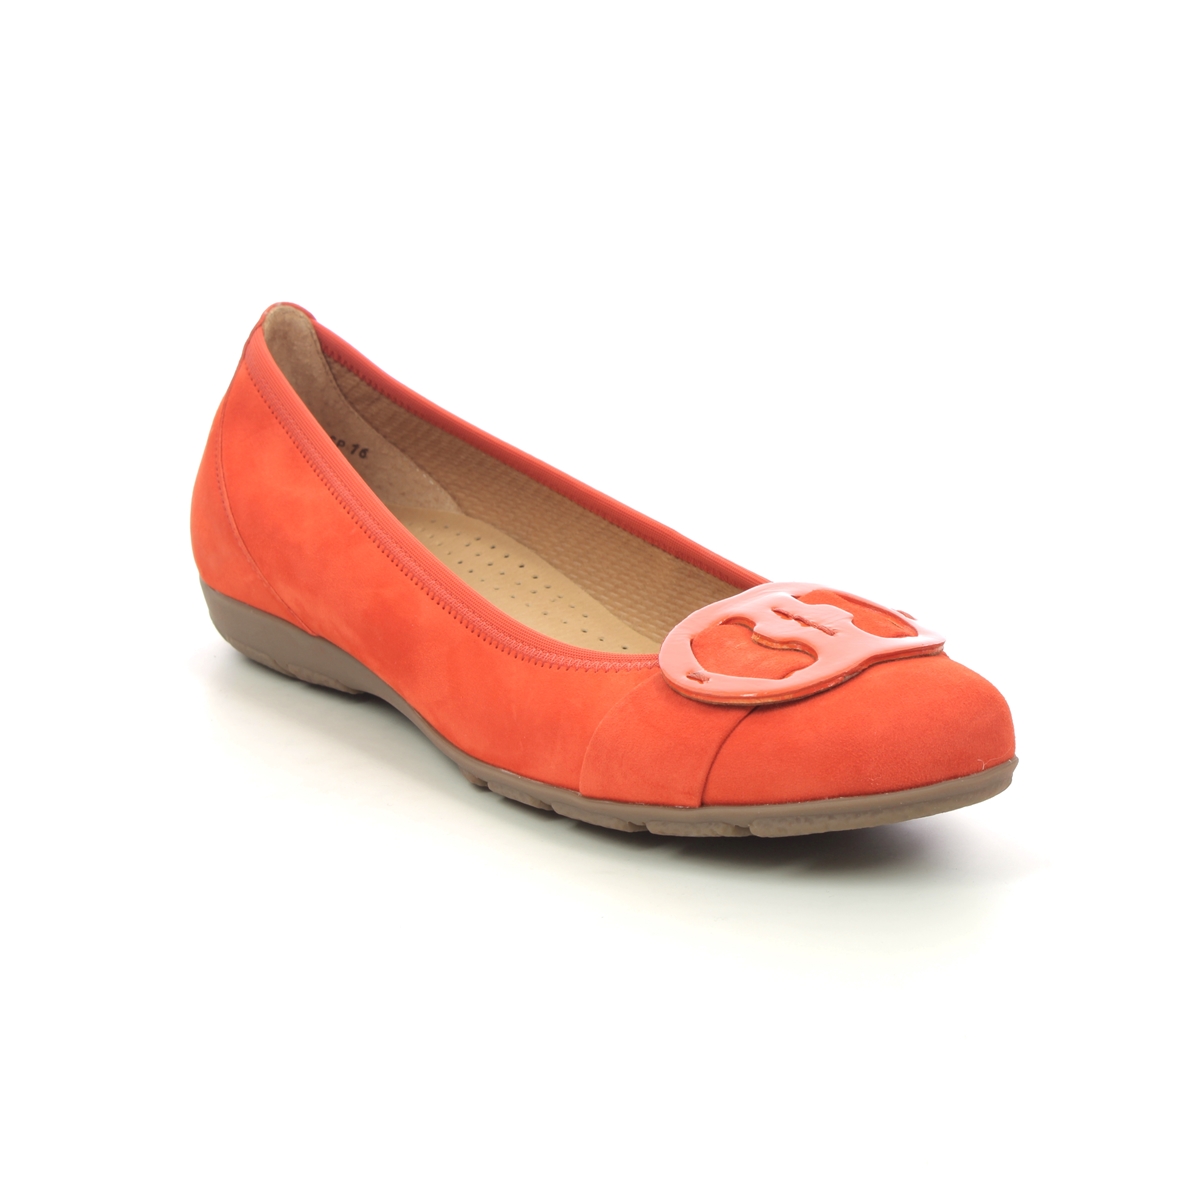 Gabor Rosta Hovercraft Orange suede Womens pumps 44.163.13 in a Plain Leather in Size 7